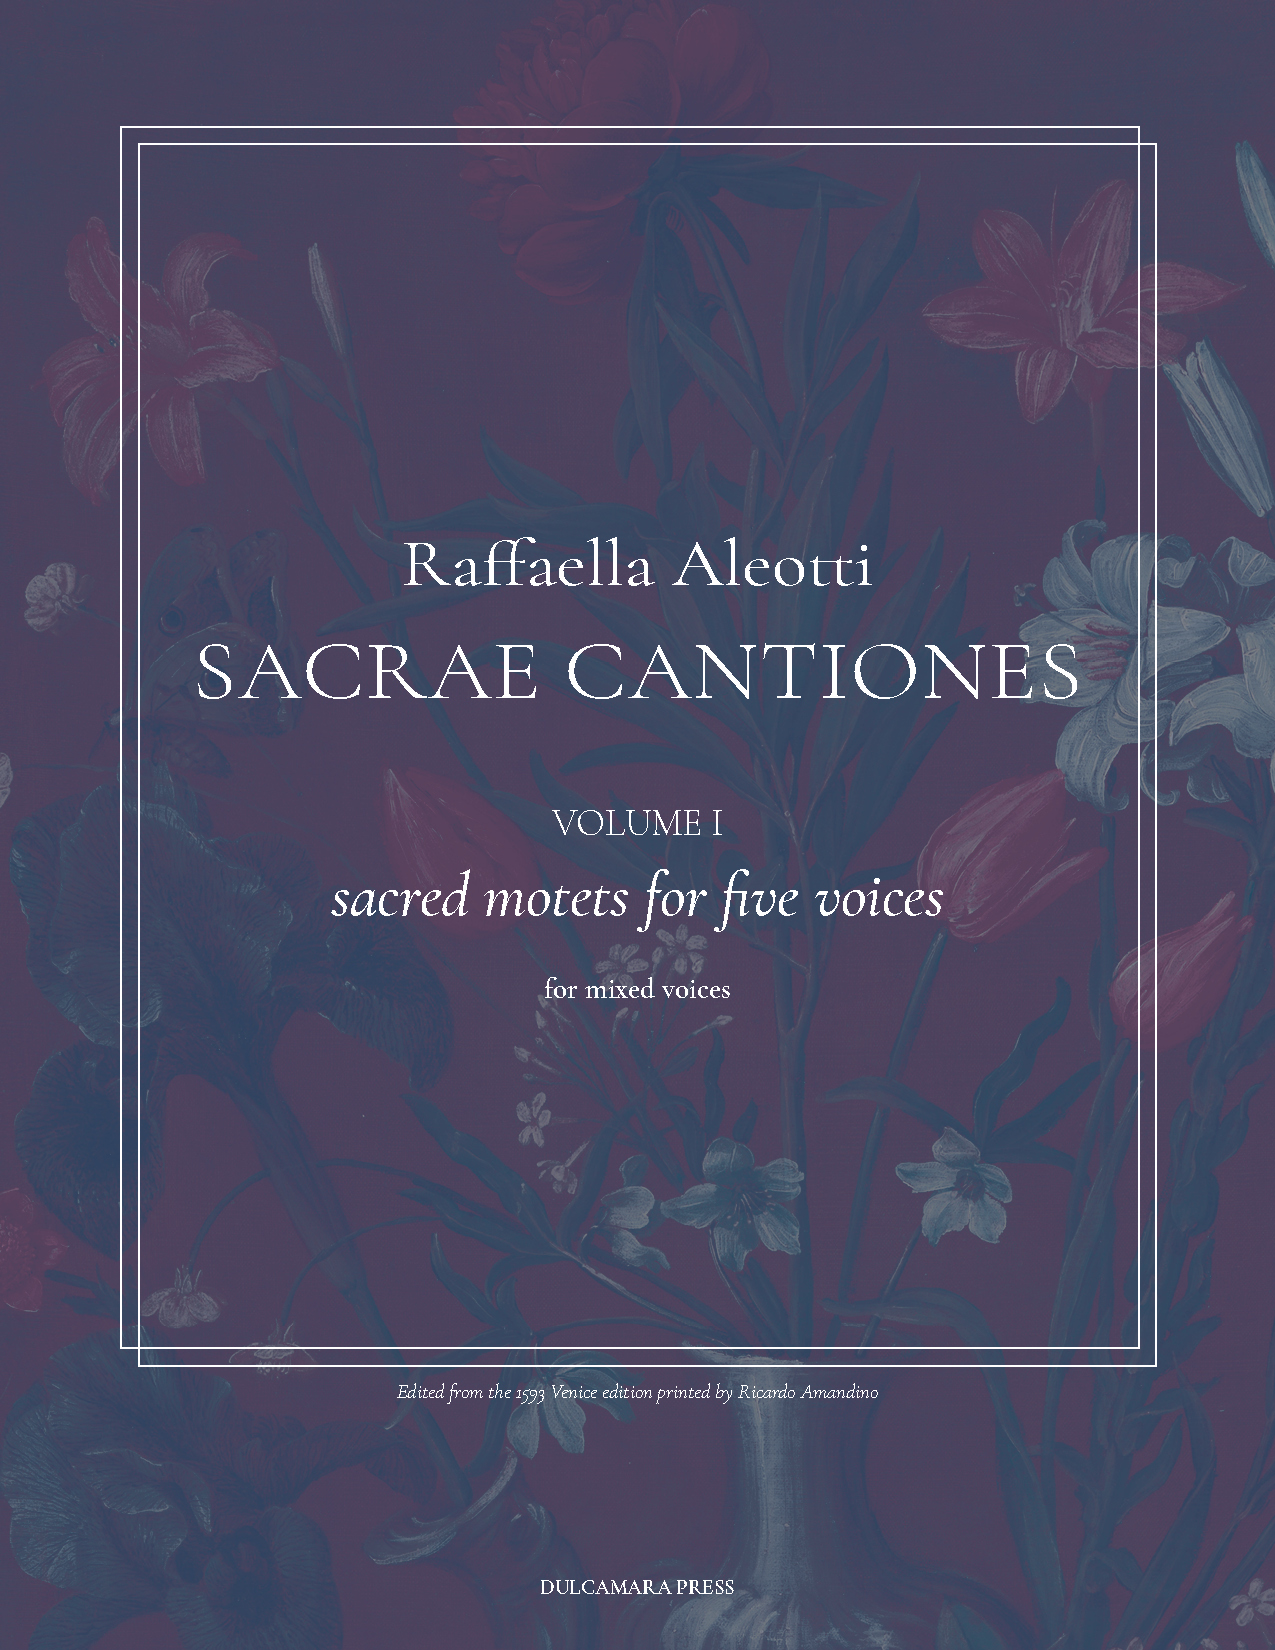 Sacrae Cantiones; motets for five mixed voices by Raffaella Aleotti